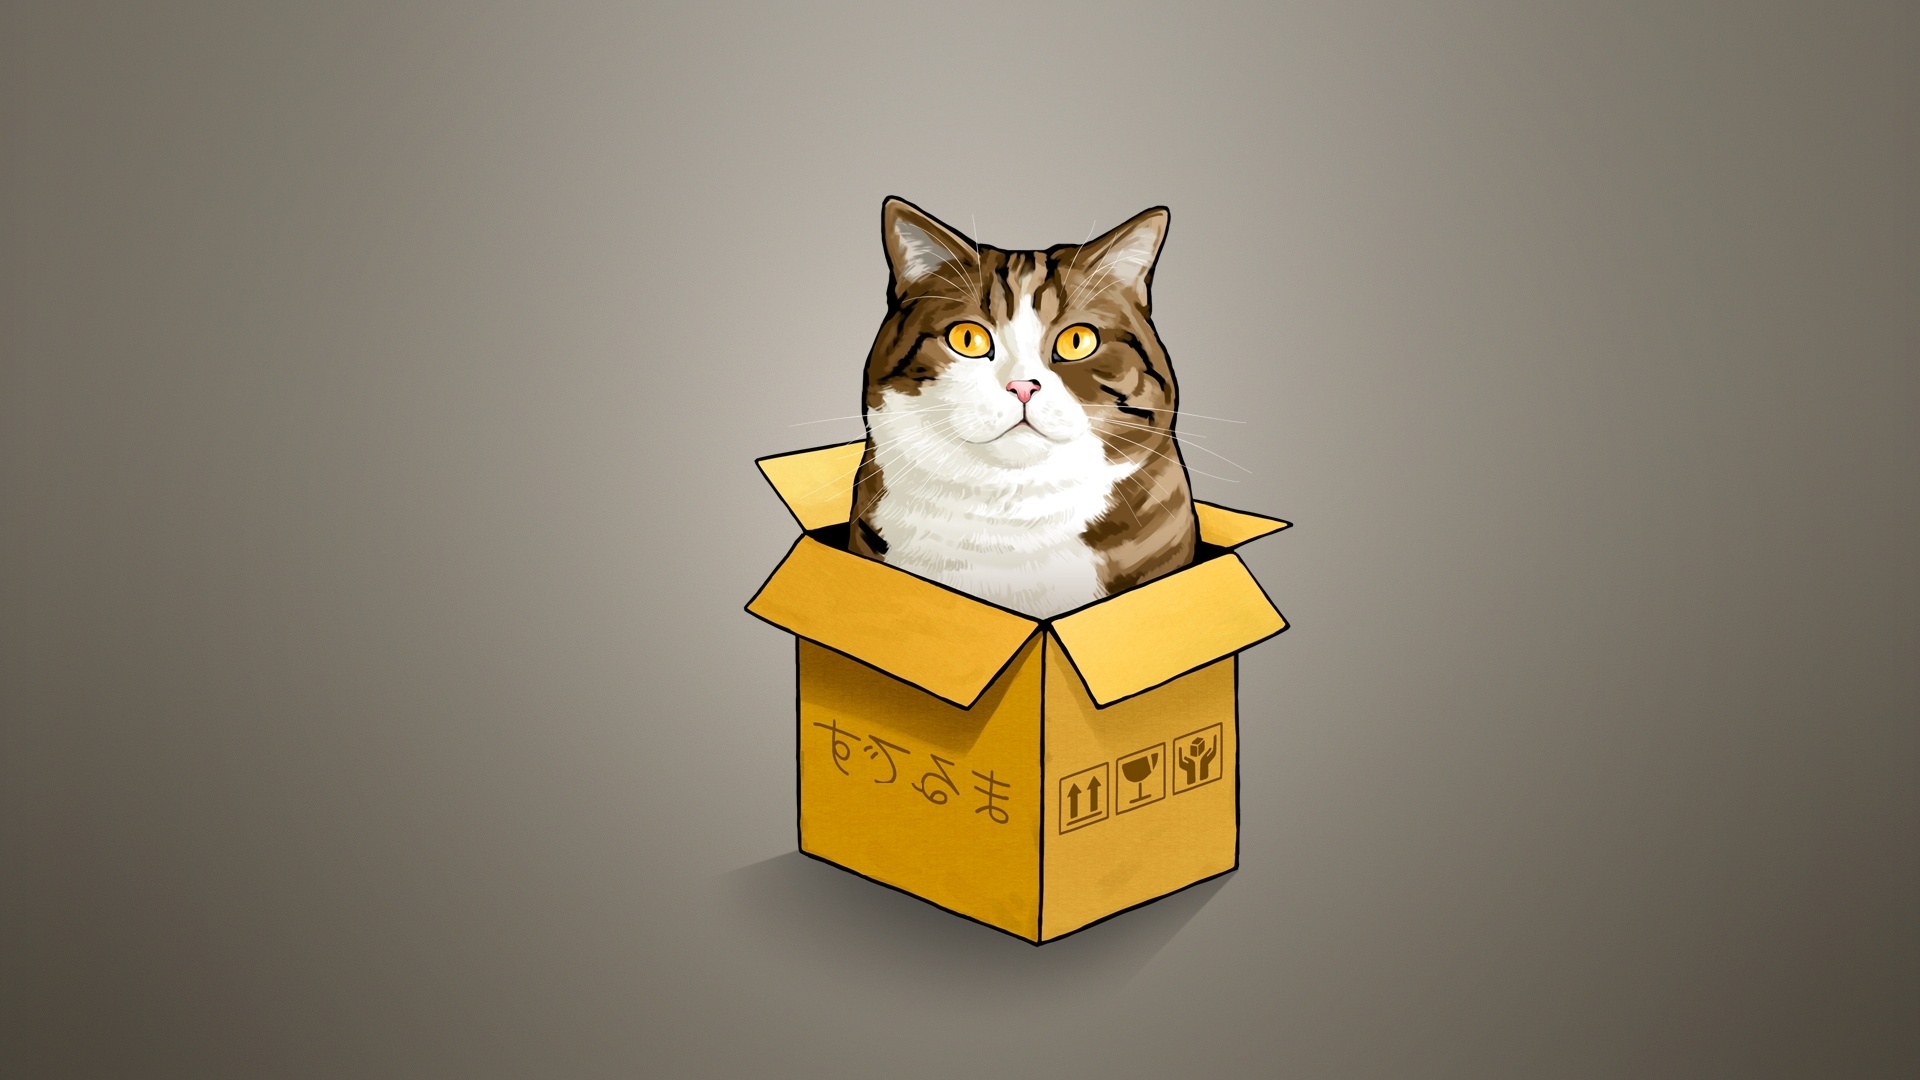 Cat in a box, Desktop and mobile wallpaper, 45 wall in a box wallpaper, Wall sizing, 1920x1080 Full HD Desktop